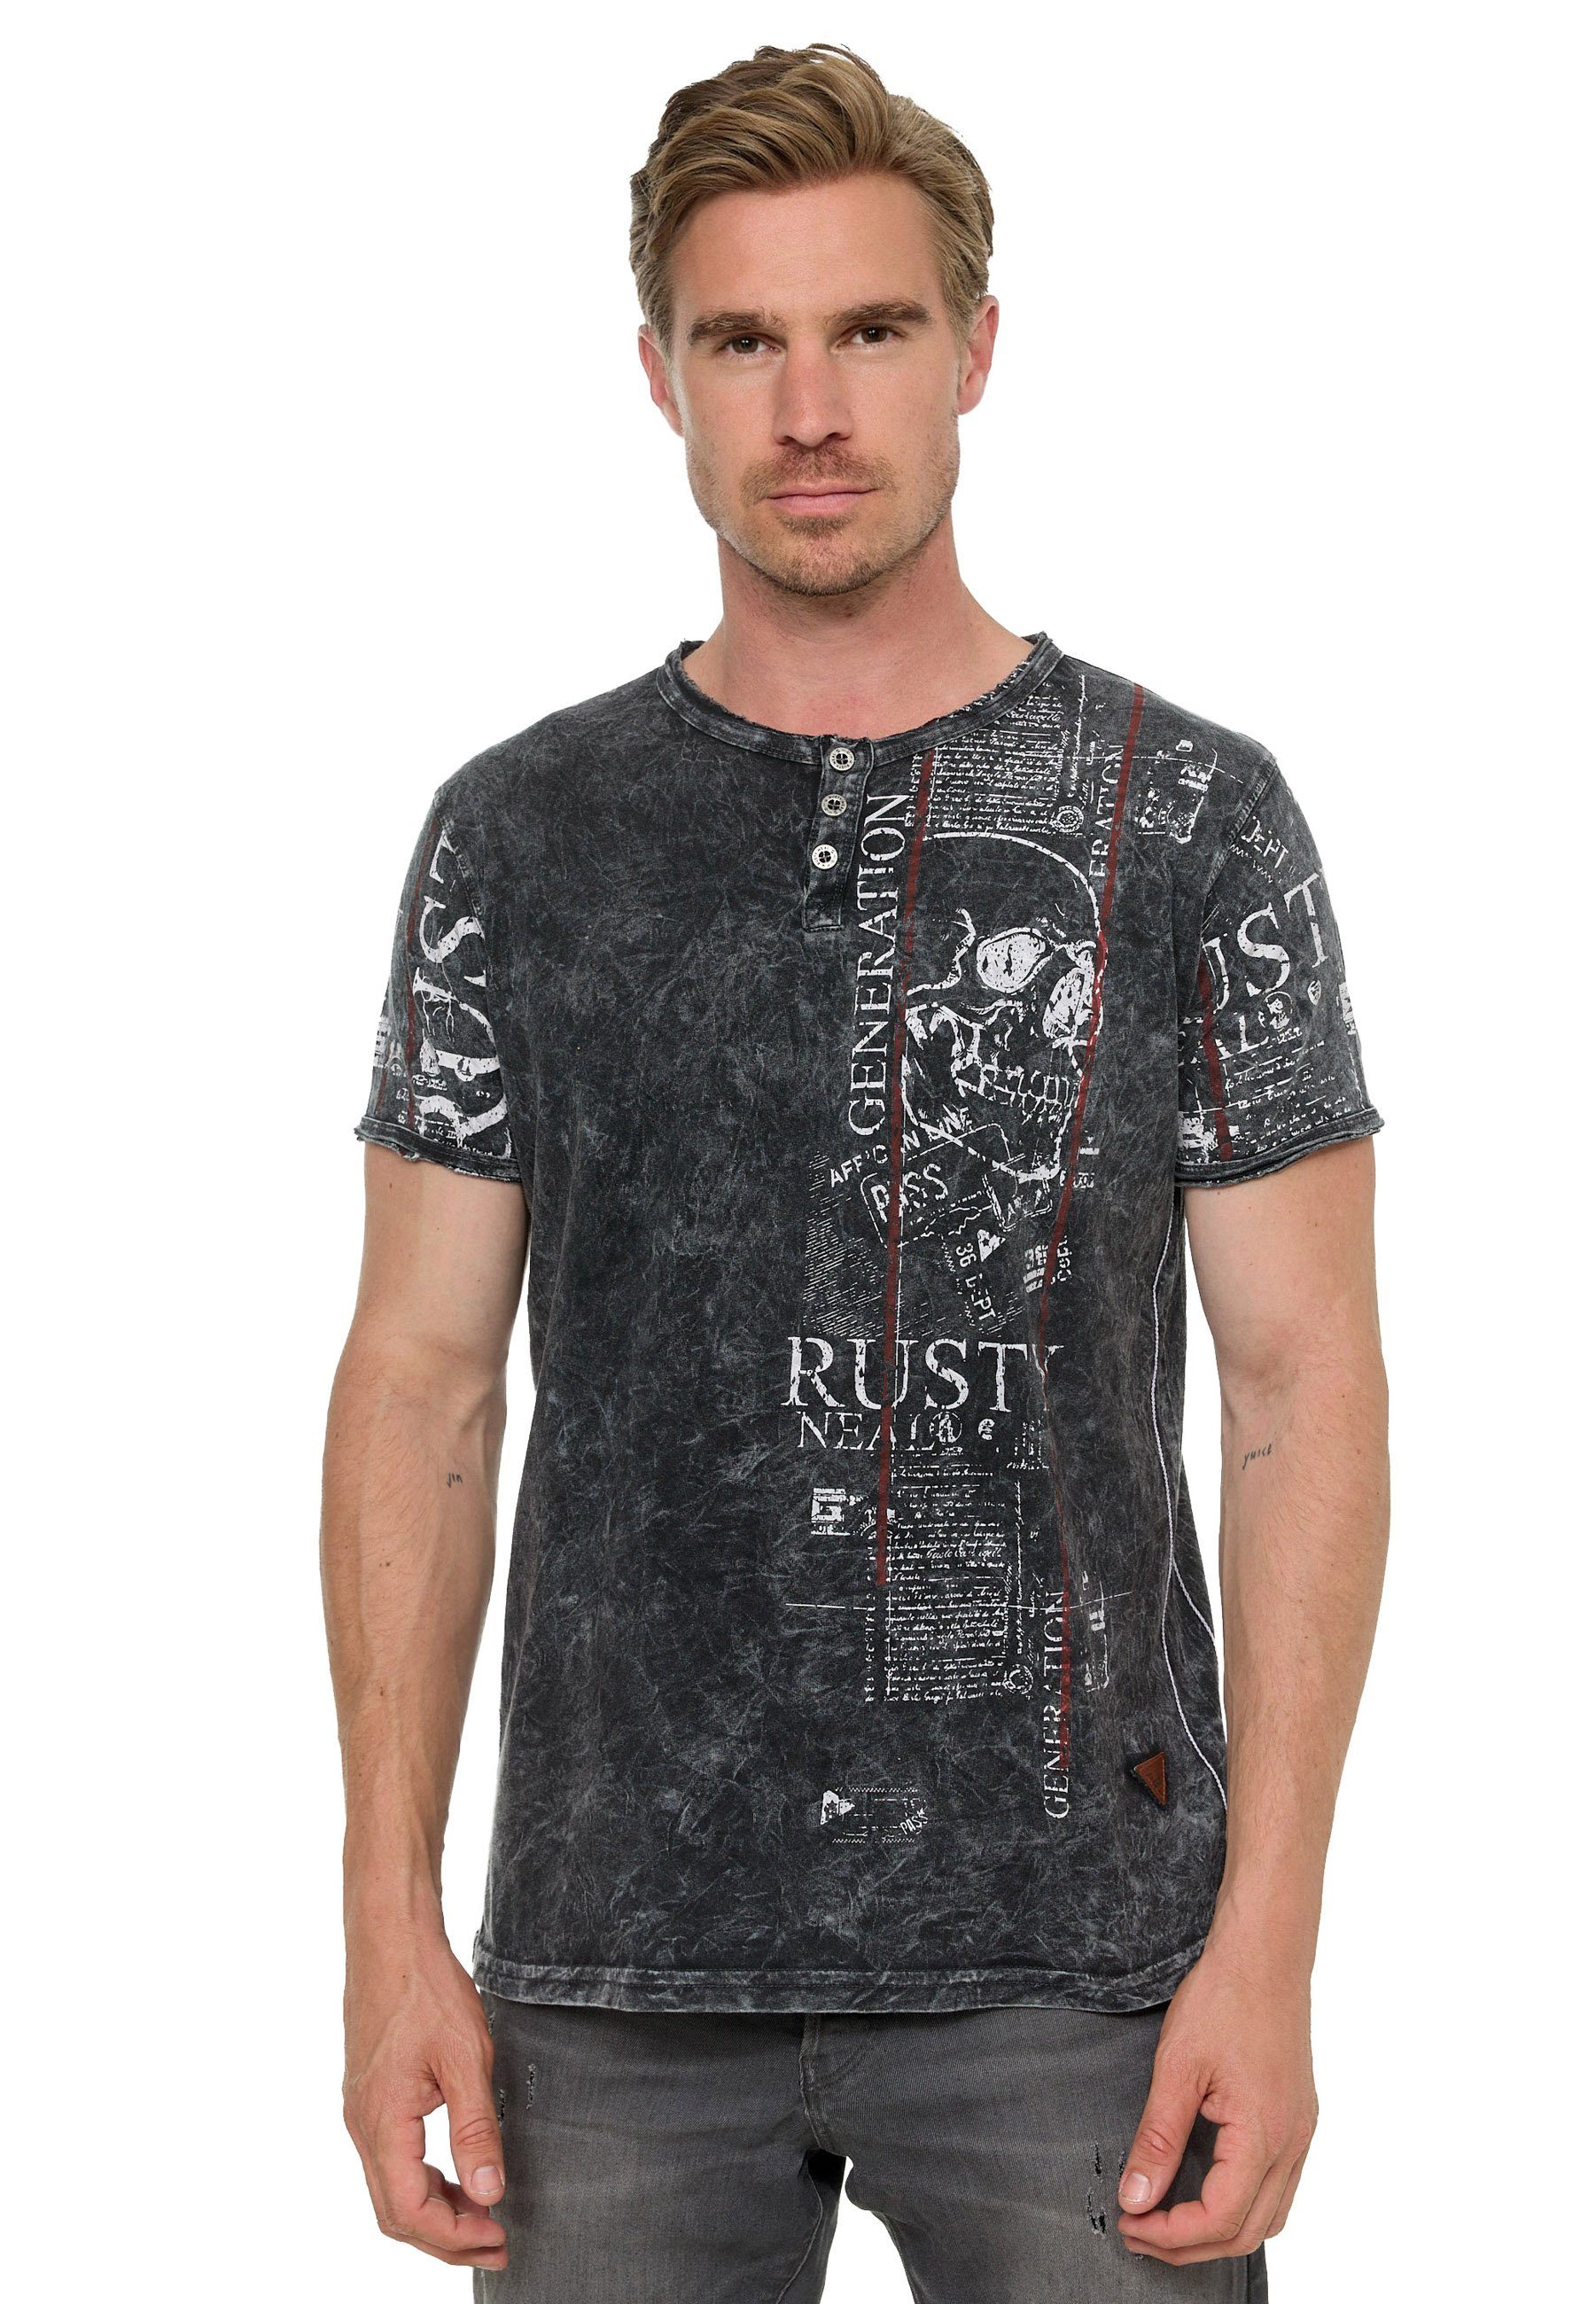 T-Shirt anthrazit mit Rusty Used-Look im Allover-Print Neal